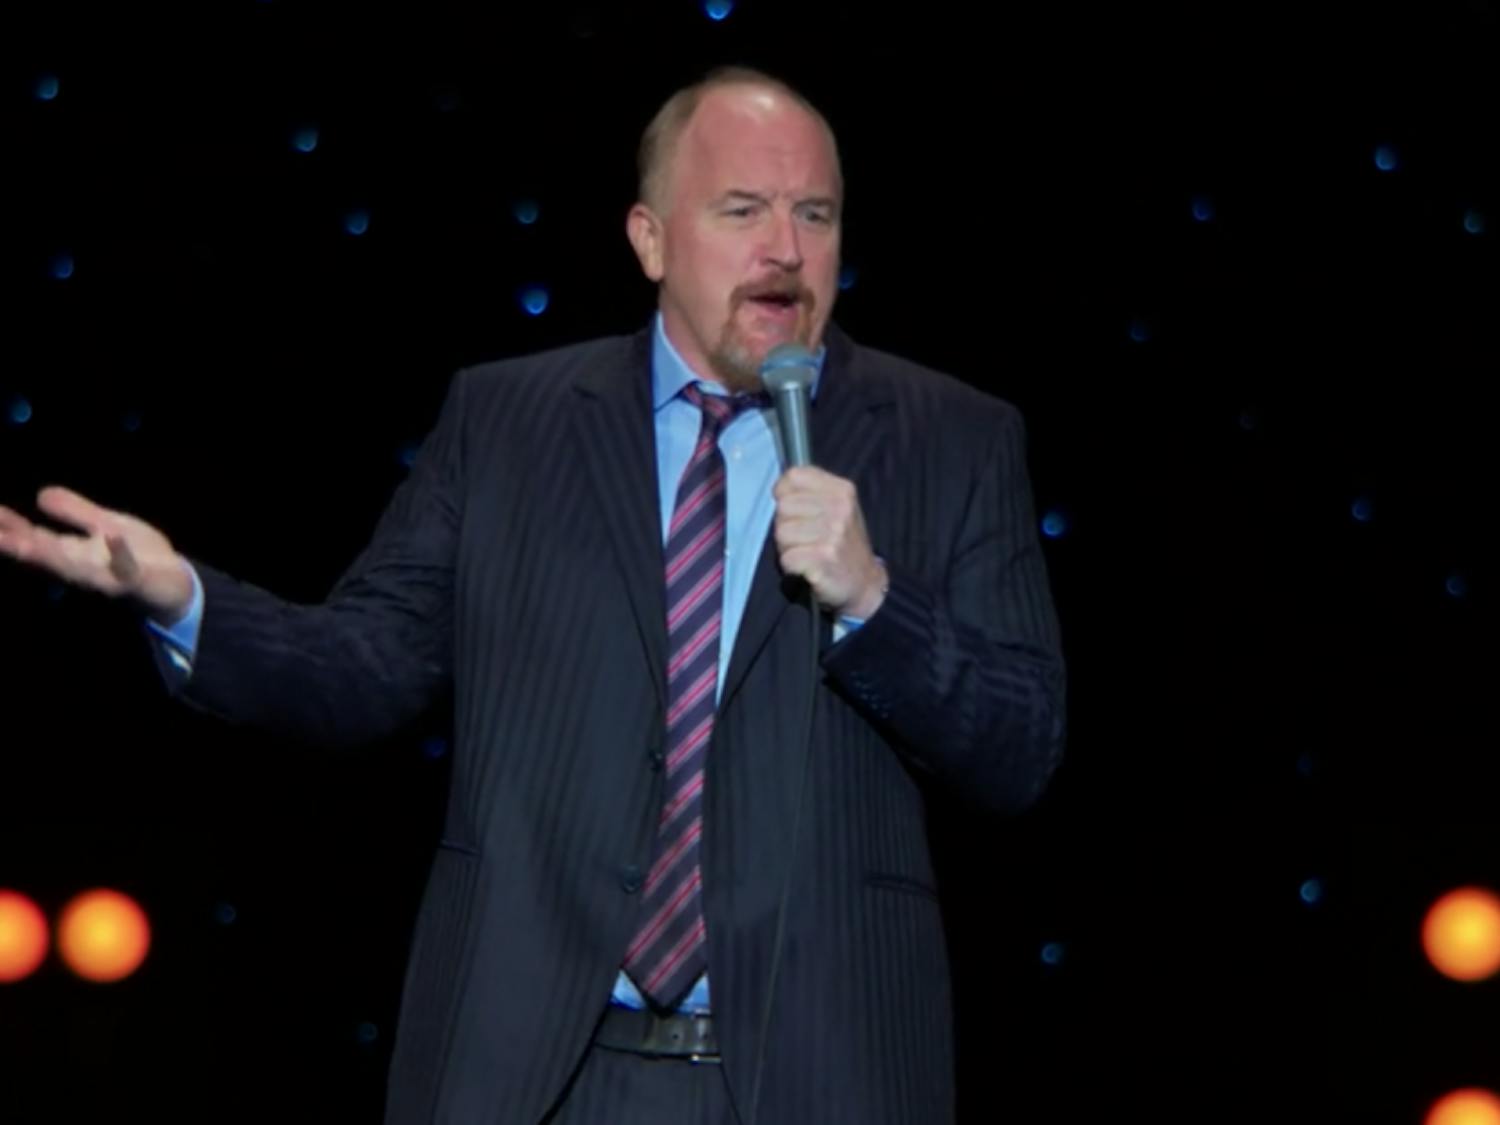 Louis C.K. tackles sensitive issues in his latest special "Louis C.K.: 2017."